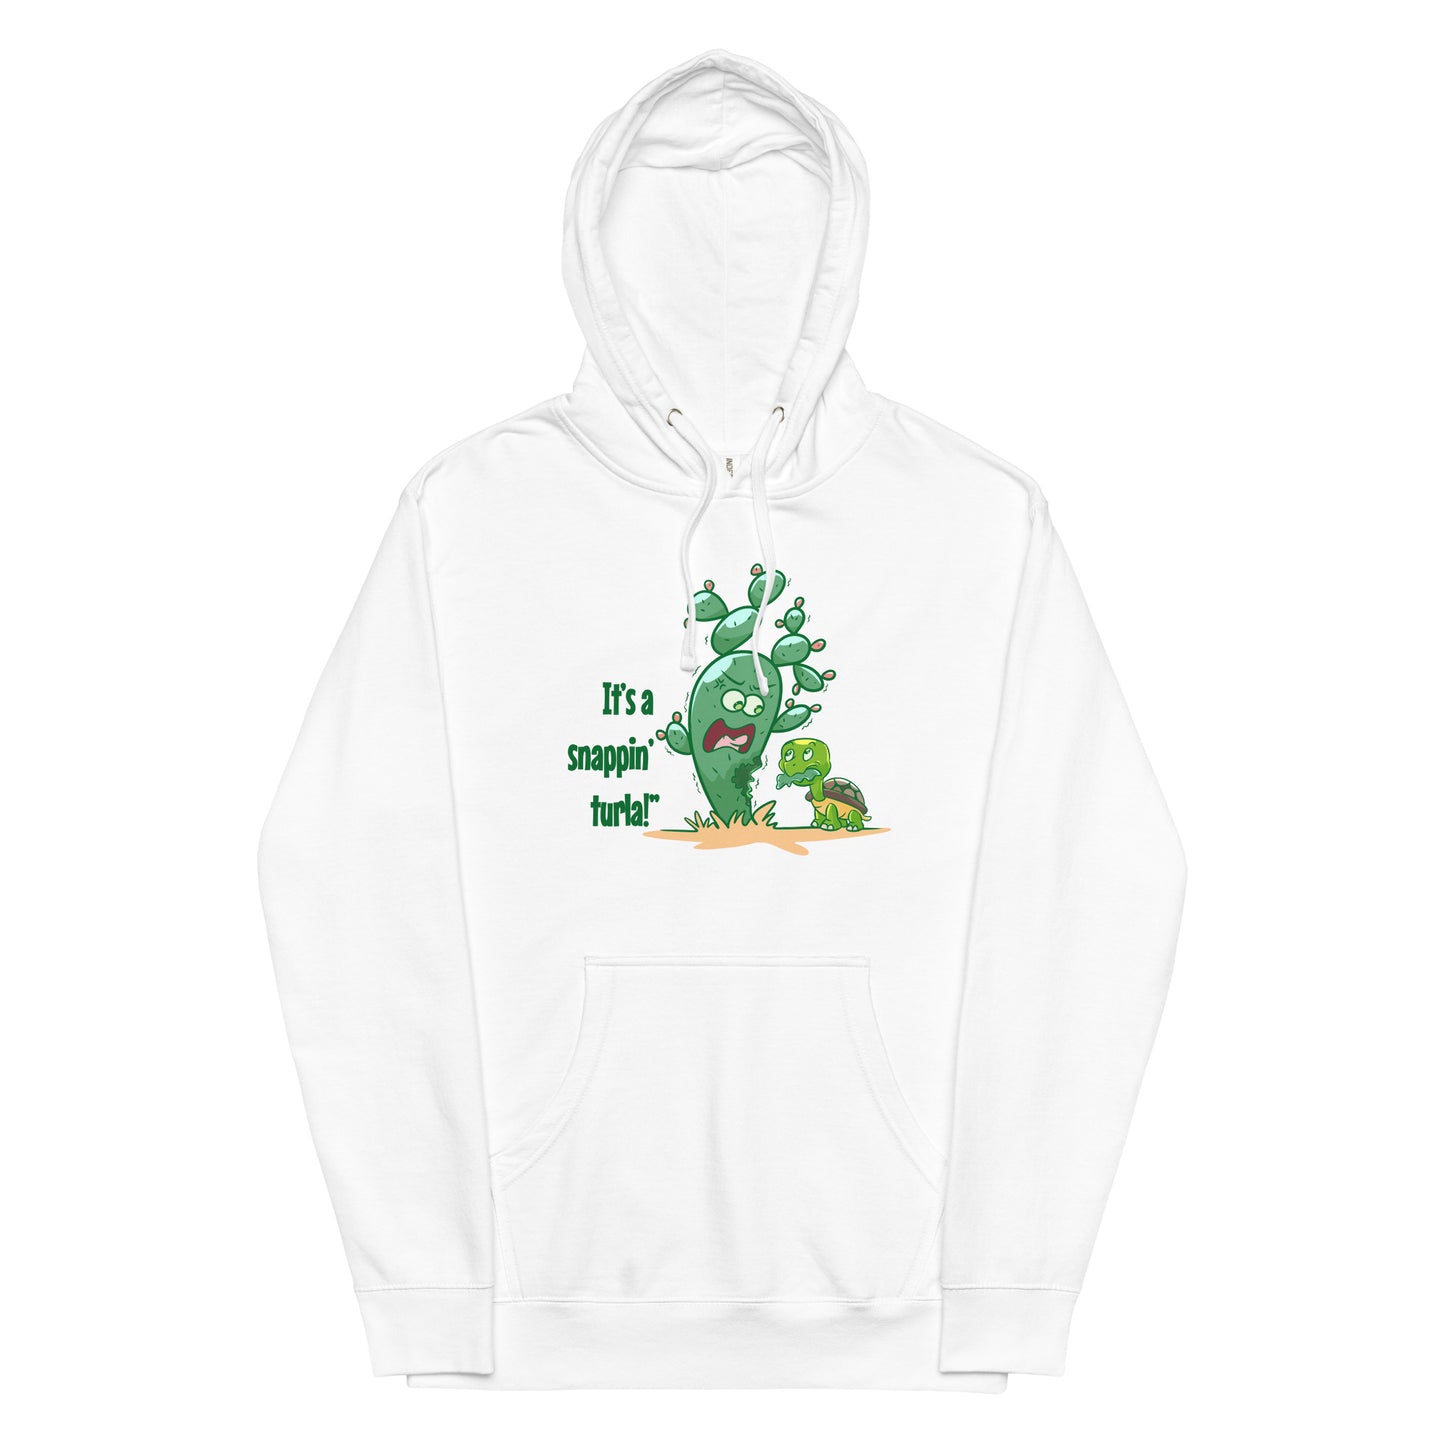 It's a snappin' turla hoodie